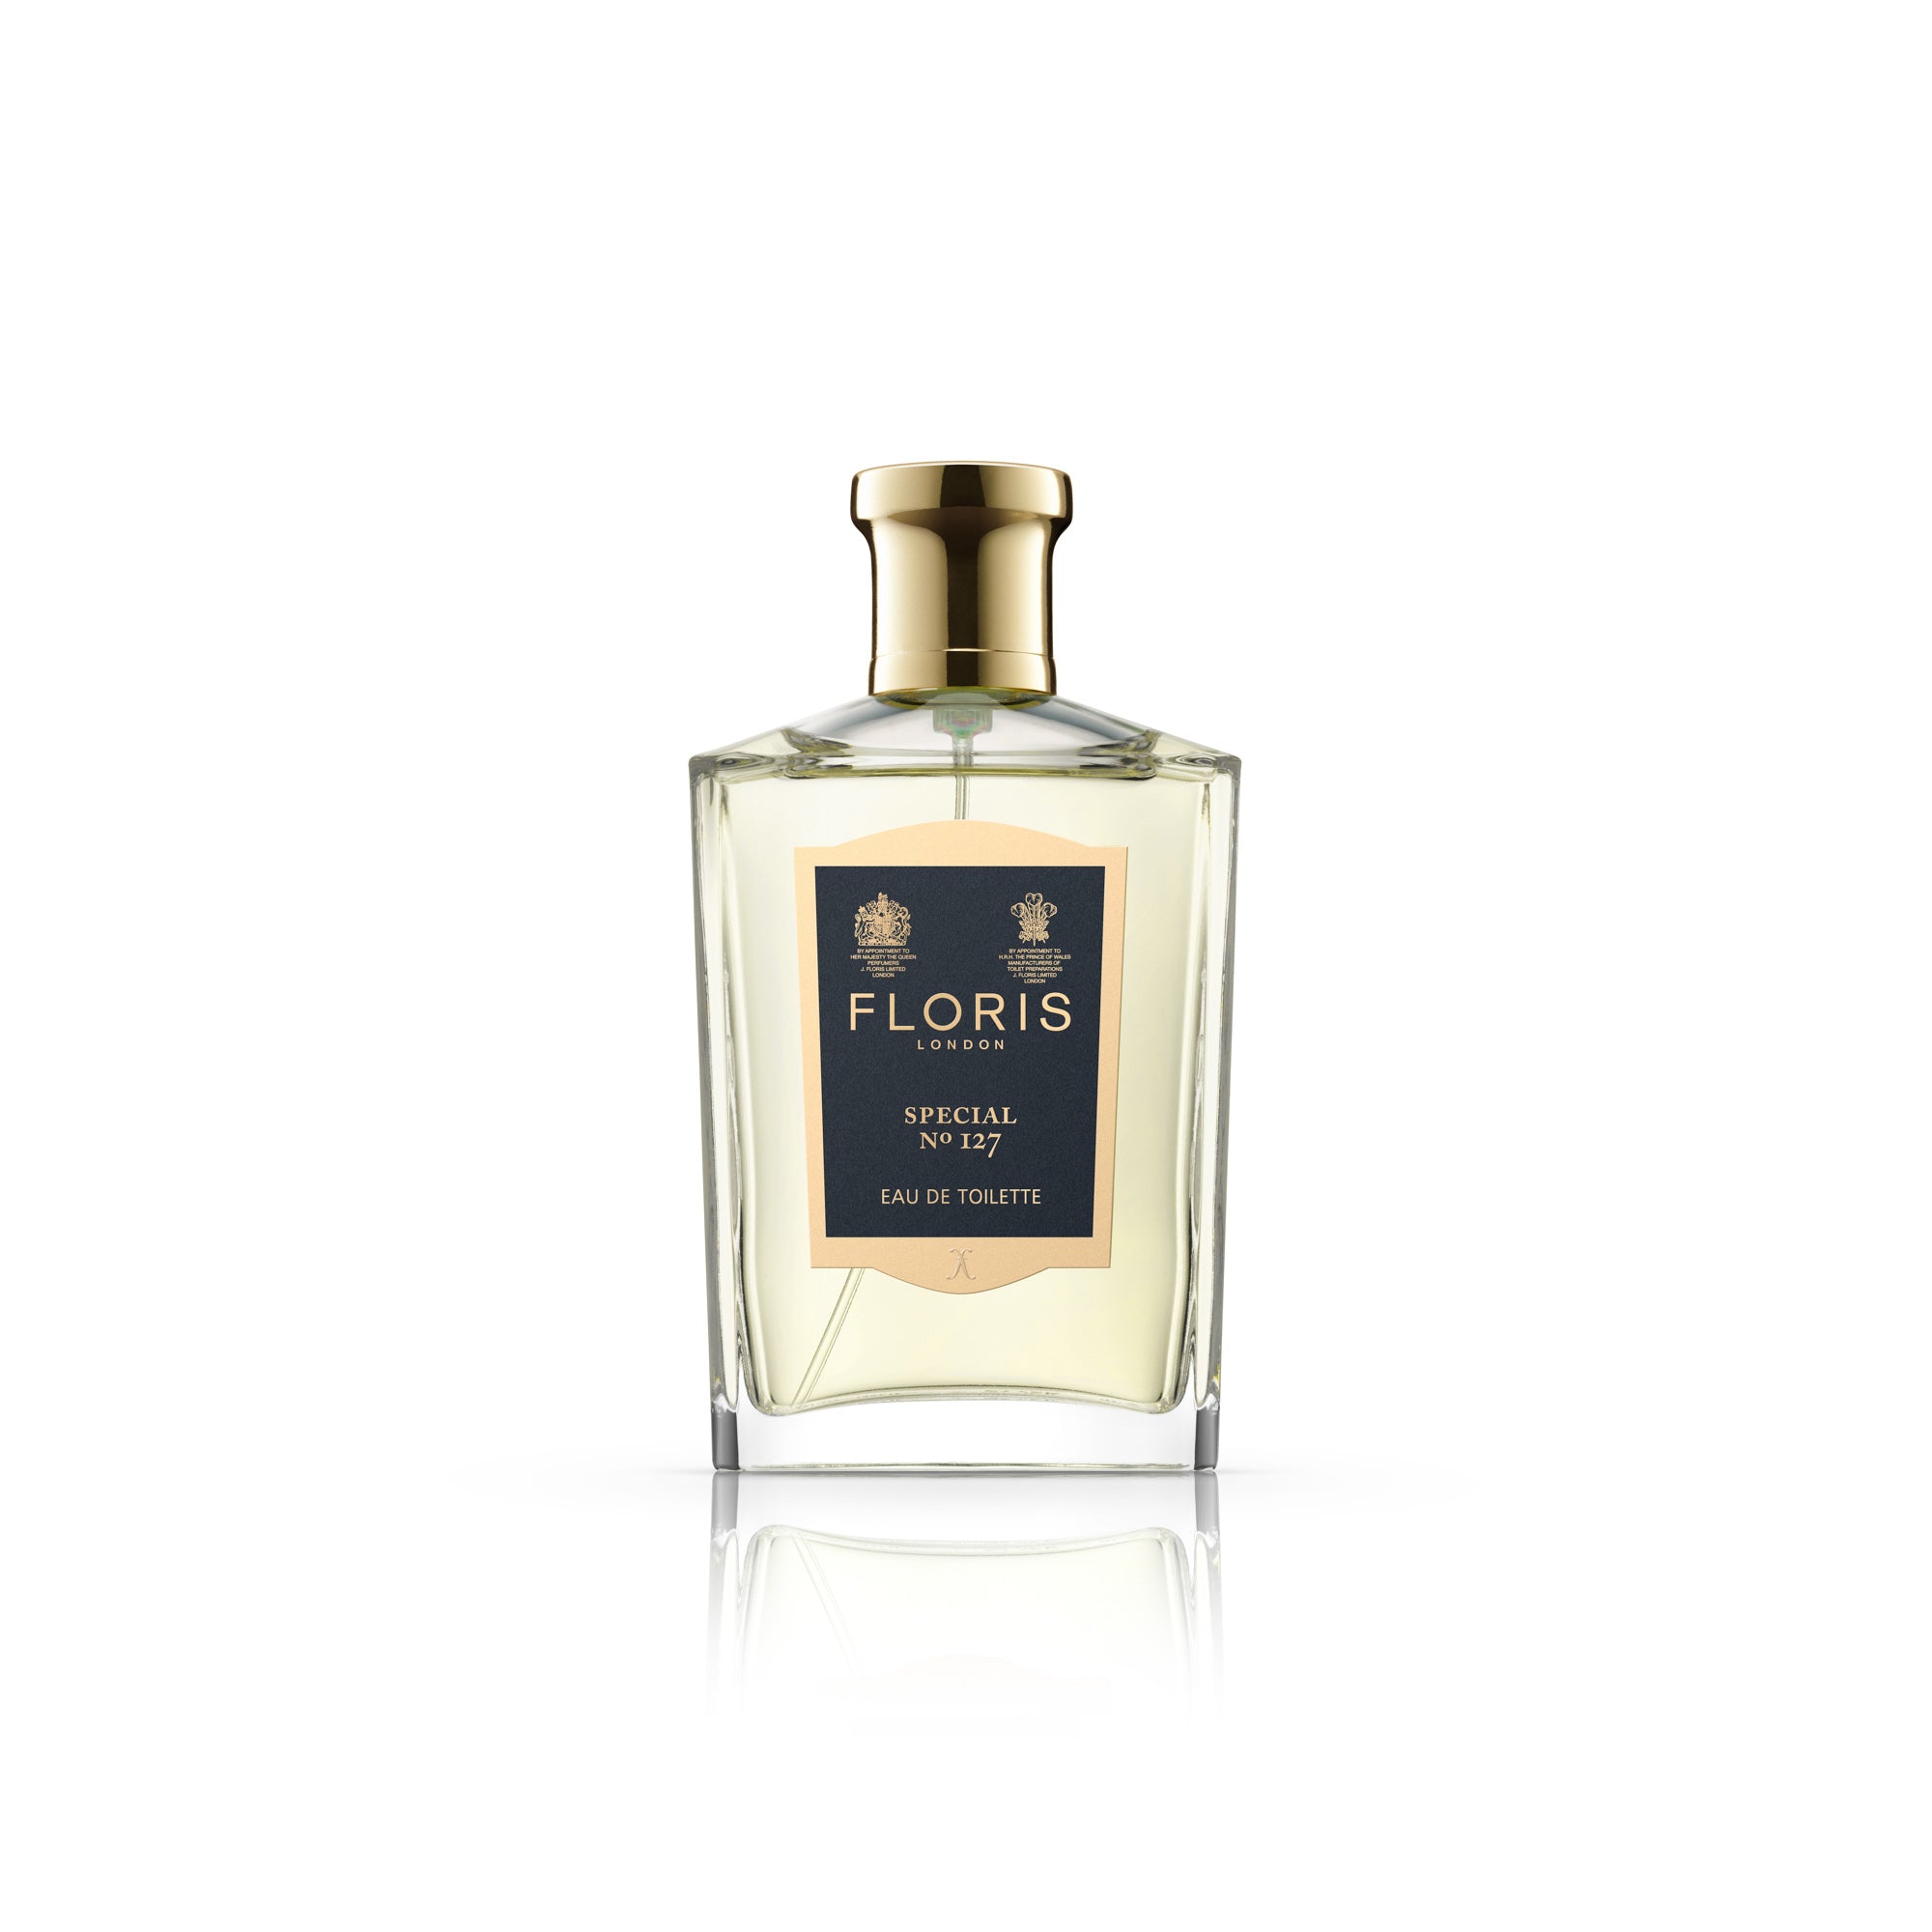 A bottle of FLORIS Special 127 100 ML cologne from KirbyAllison.com with a citrus floral scent on a white background.